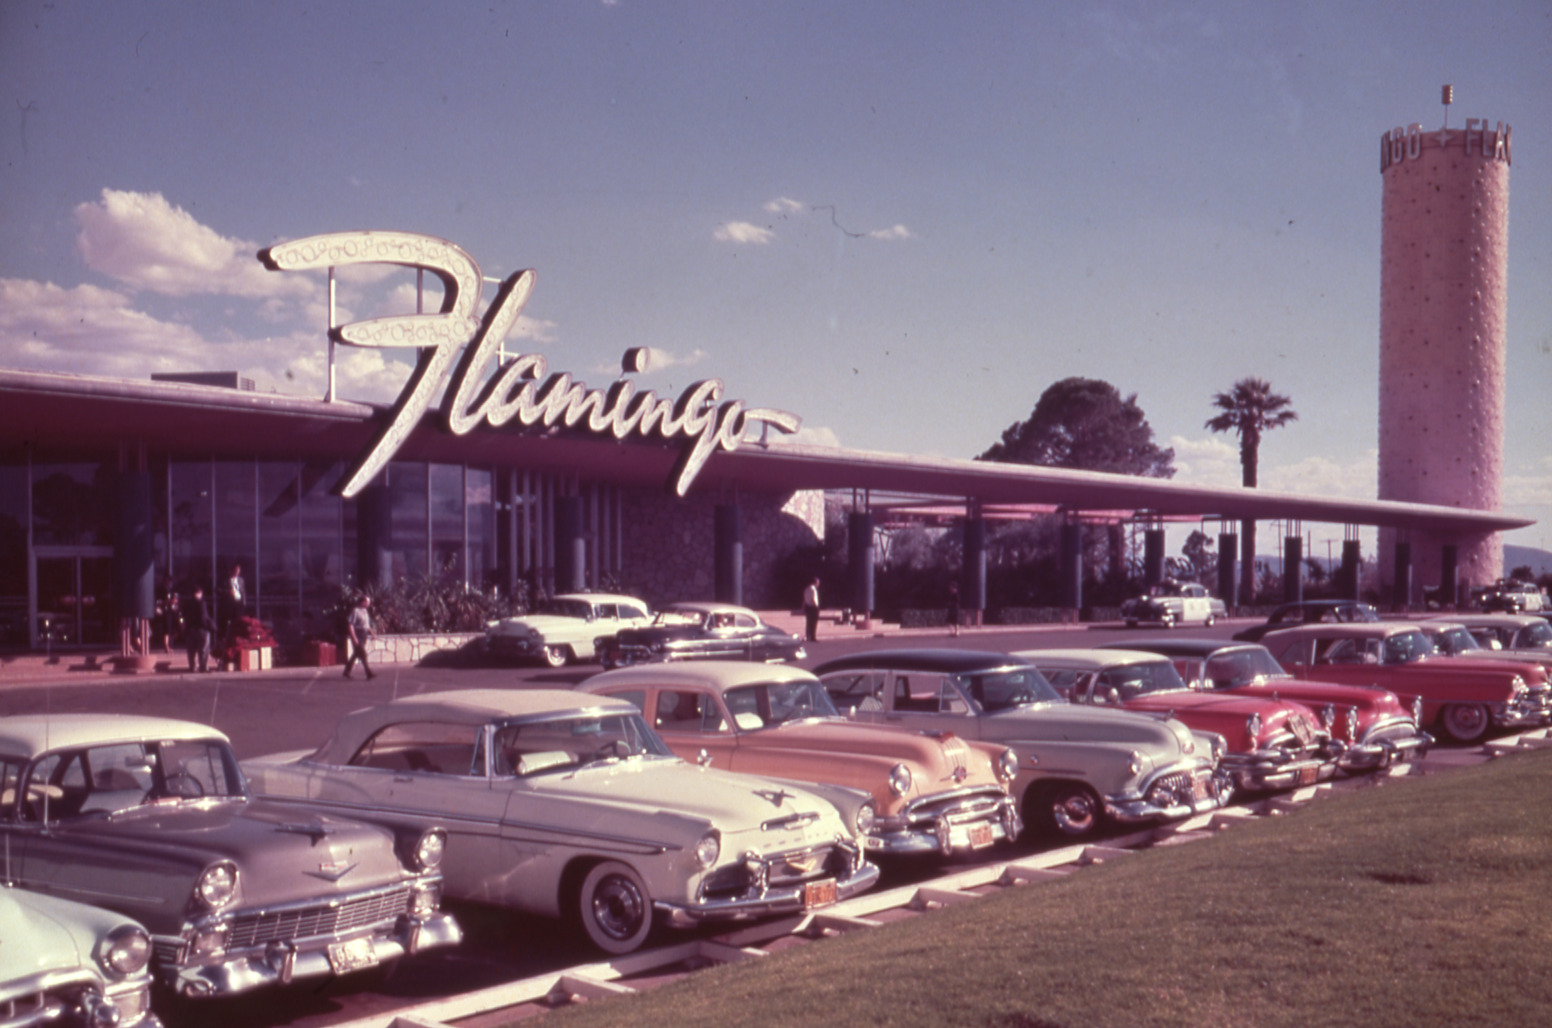 Flamingo Hotel lettering and monument signs, Las Vegas, Nevada: photographic print